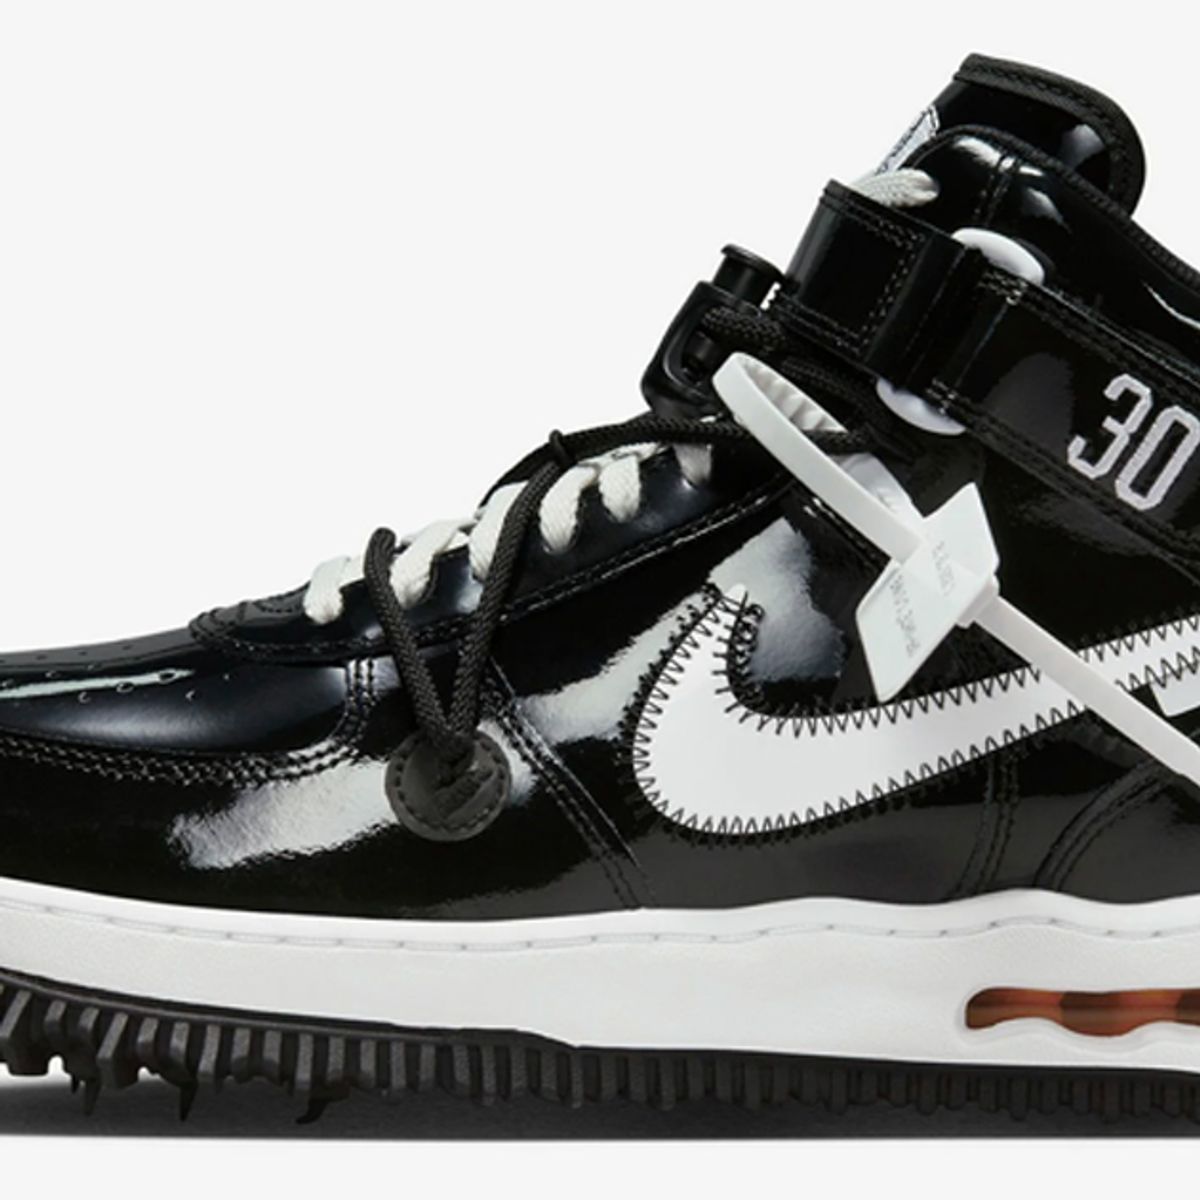 The Off-White x Nike Air Force 1 Mid Sheed Has Been Unveiled